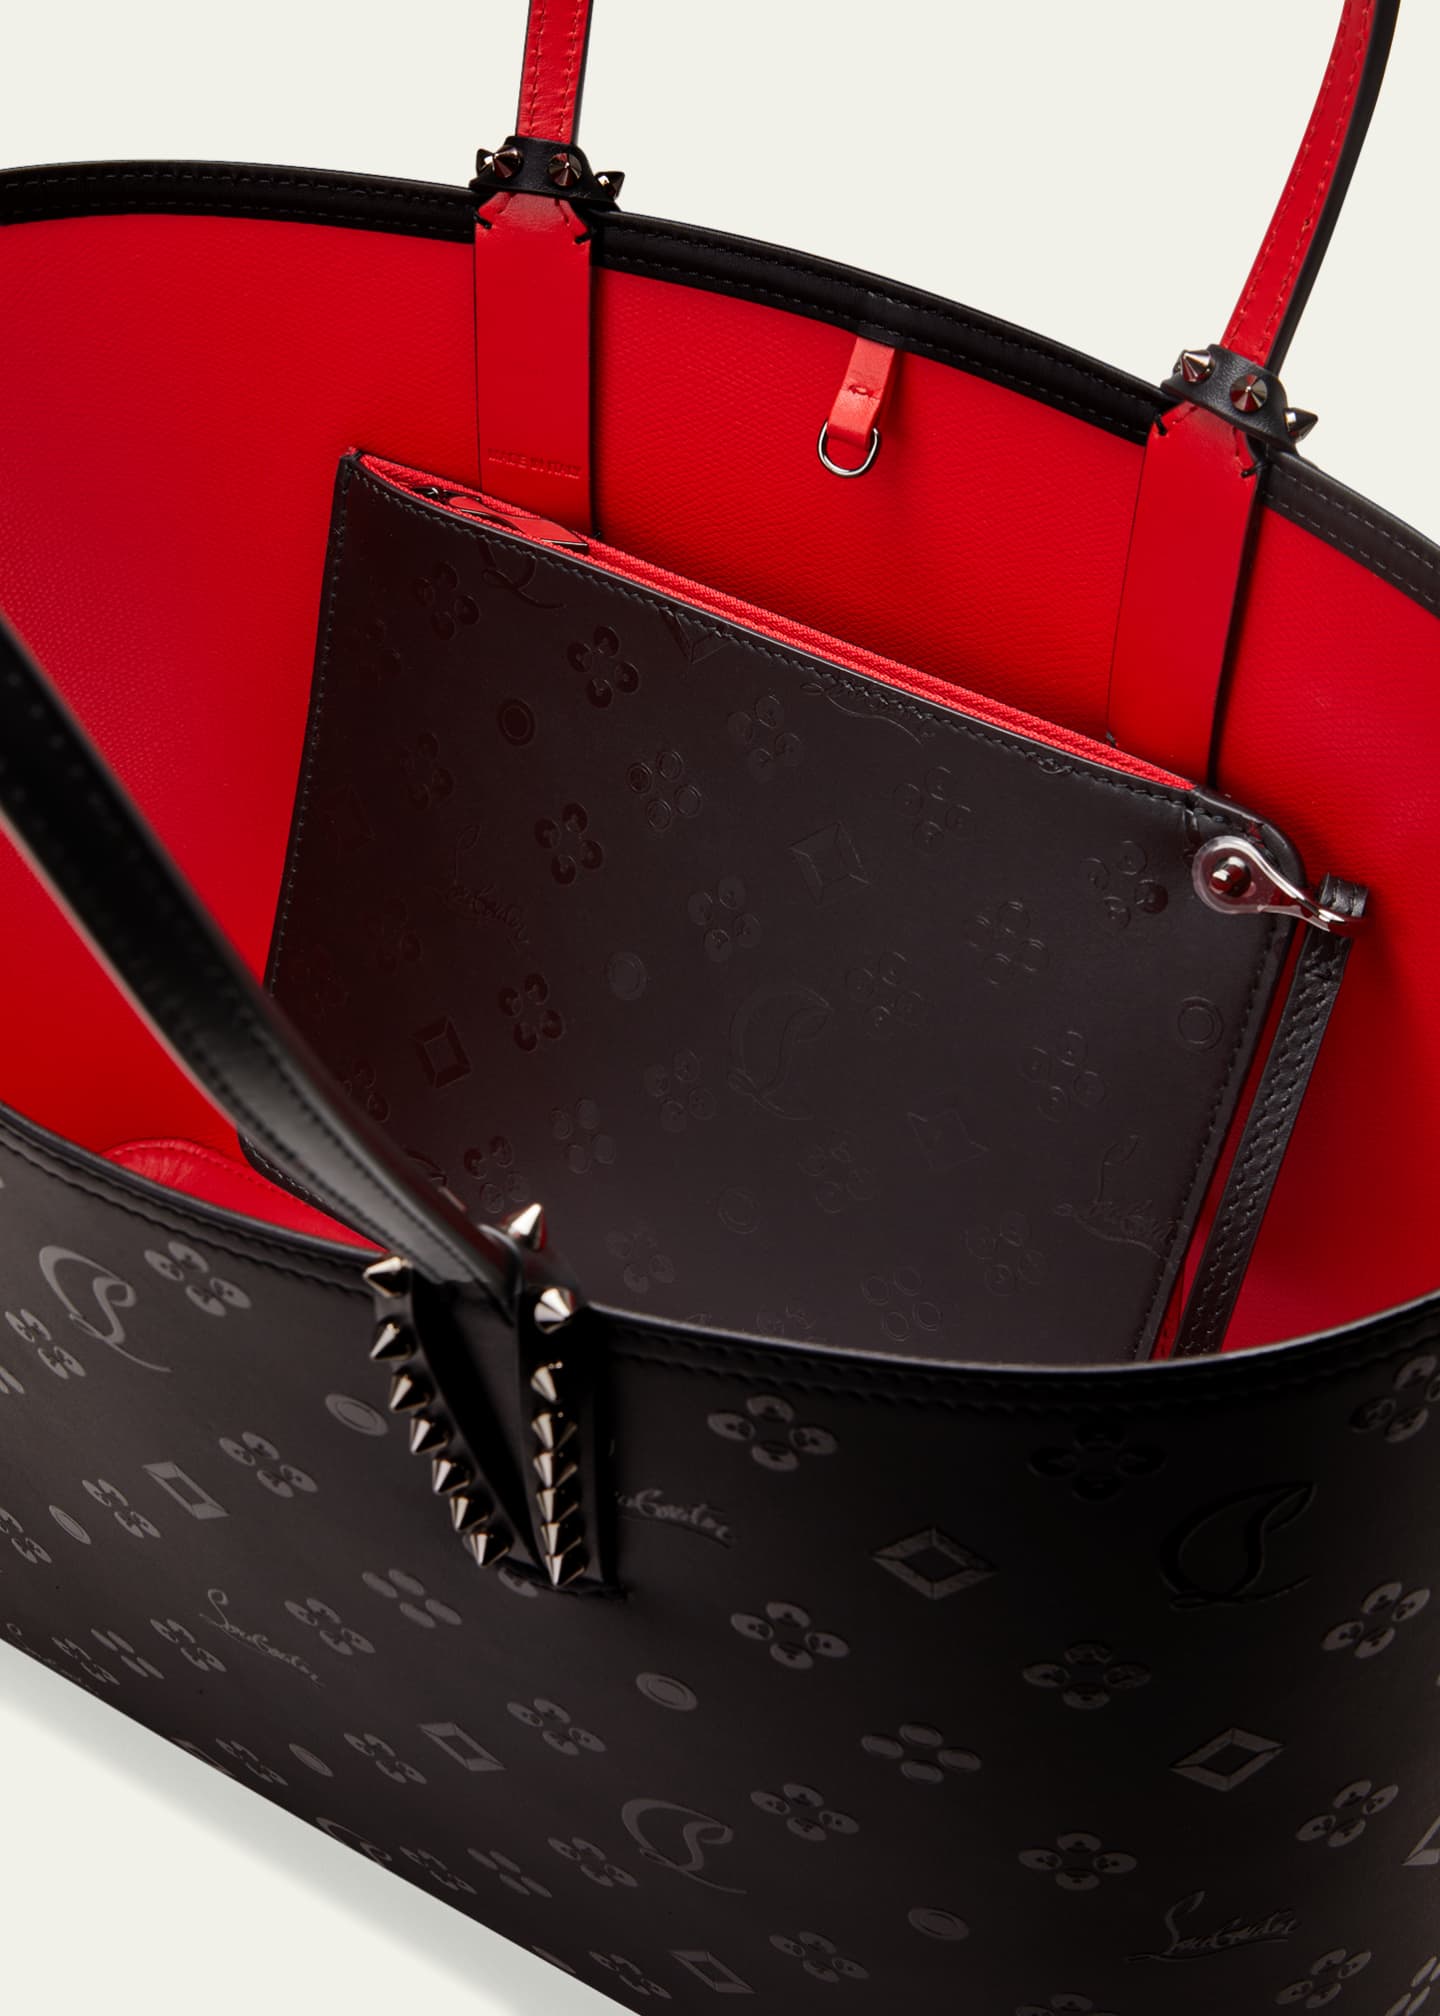 Experience with Christian Louboutin bags? : r/handbags